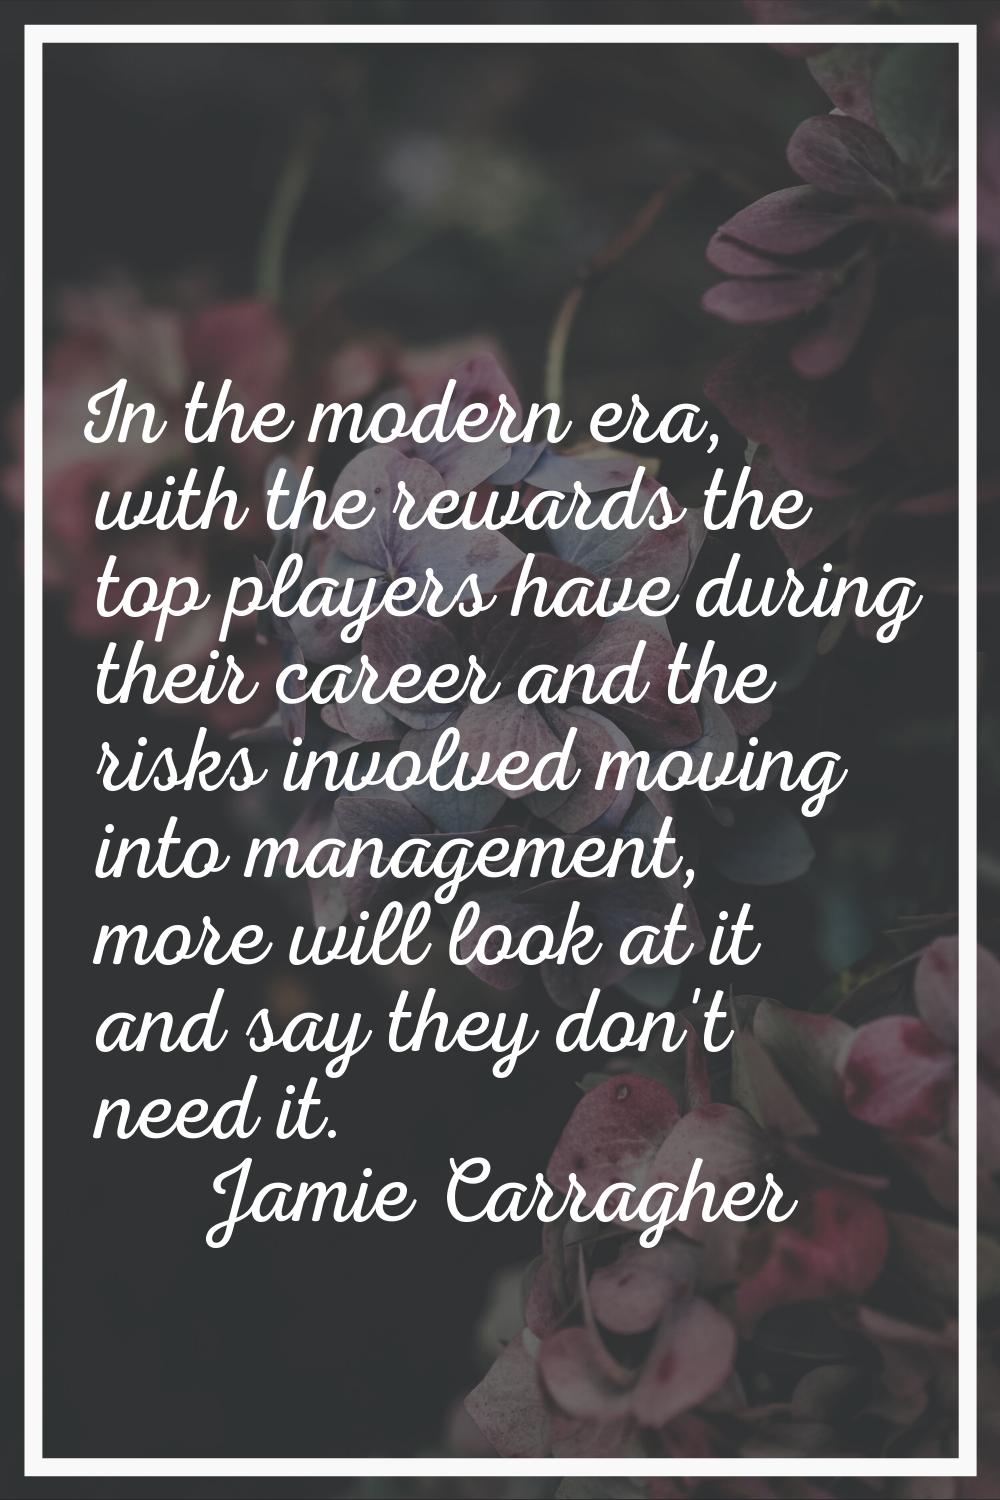 In the modern era, with the rewards the top players have during their career and the risks involved